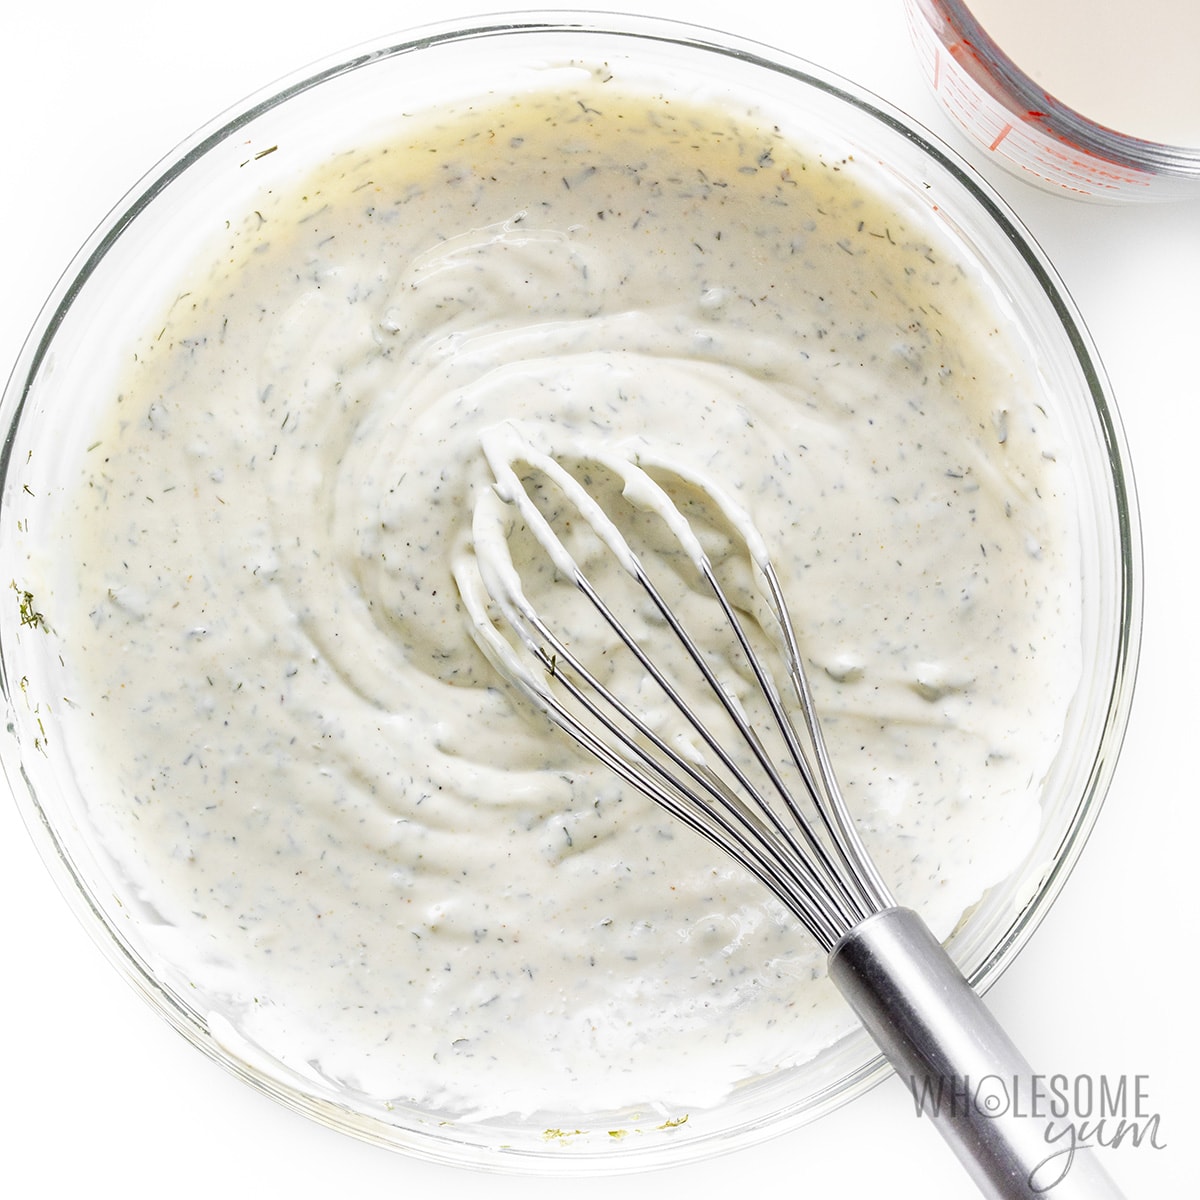 Homemade ranch dressing whisked in a bowl.